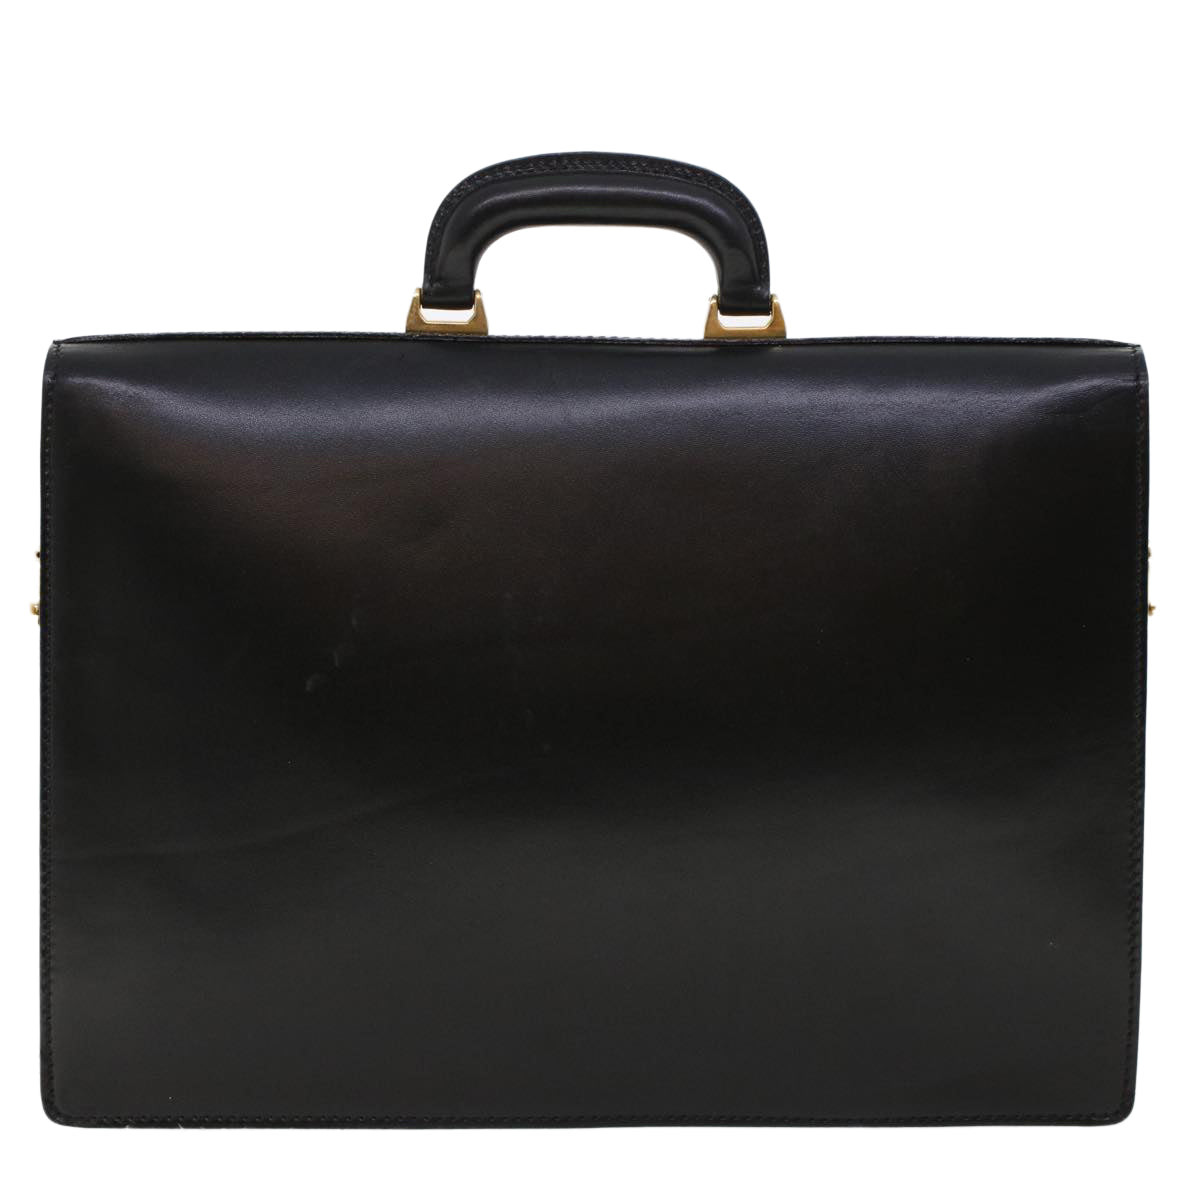 BALLY Business Bag Leather 2way Black Auth bs5682 - 0